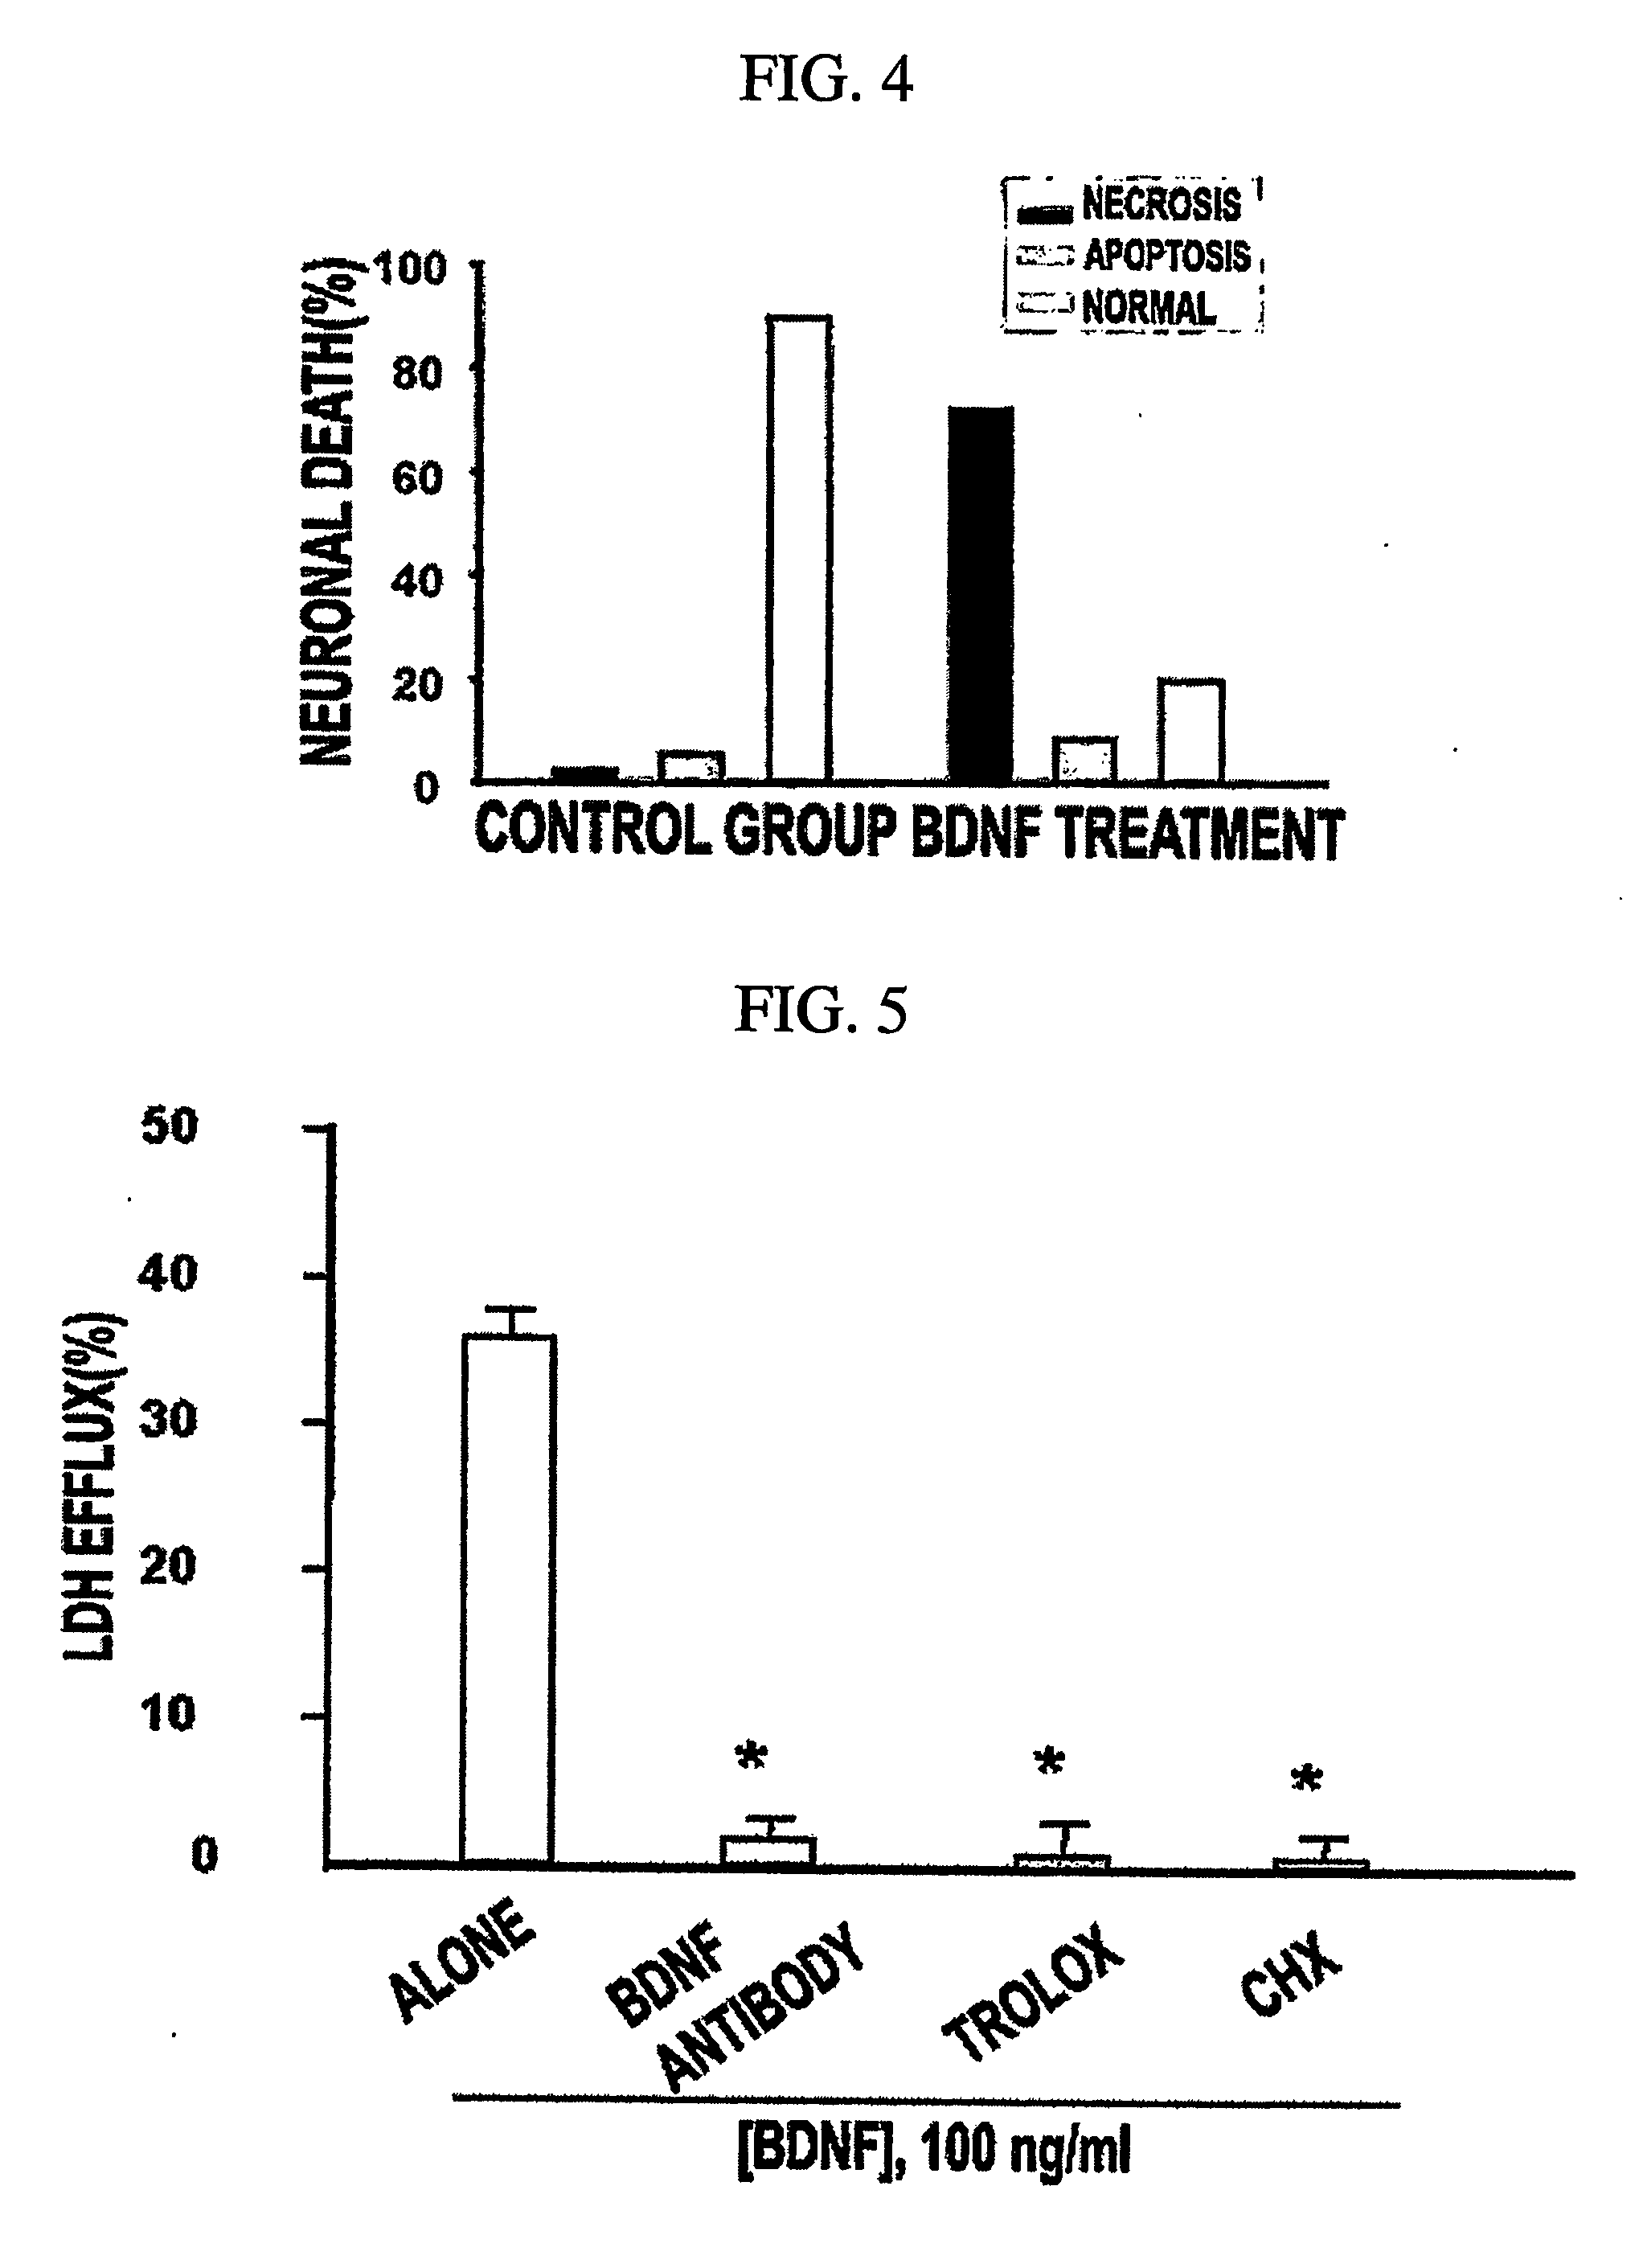 Method for inhibition of necrosis induced by neurotrophin